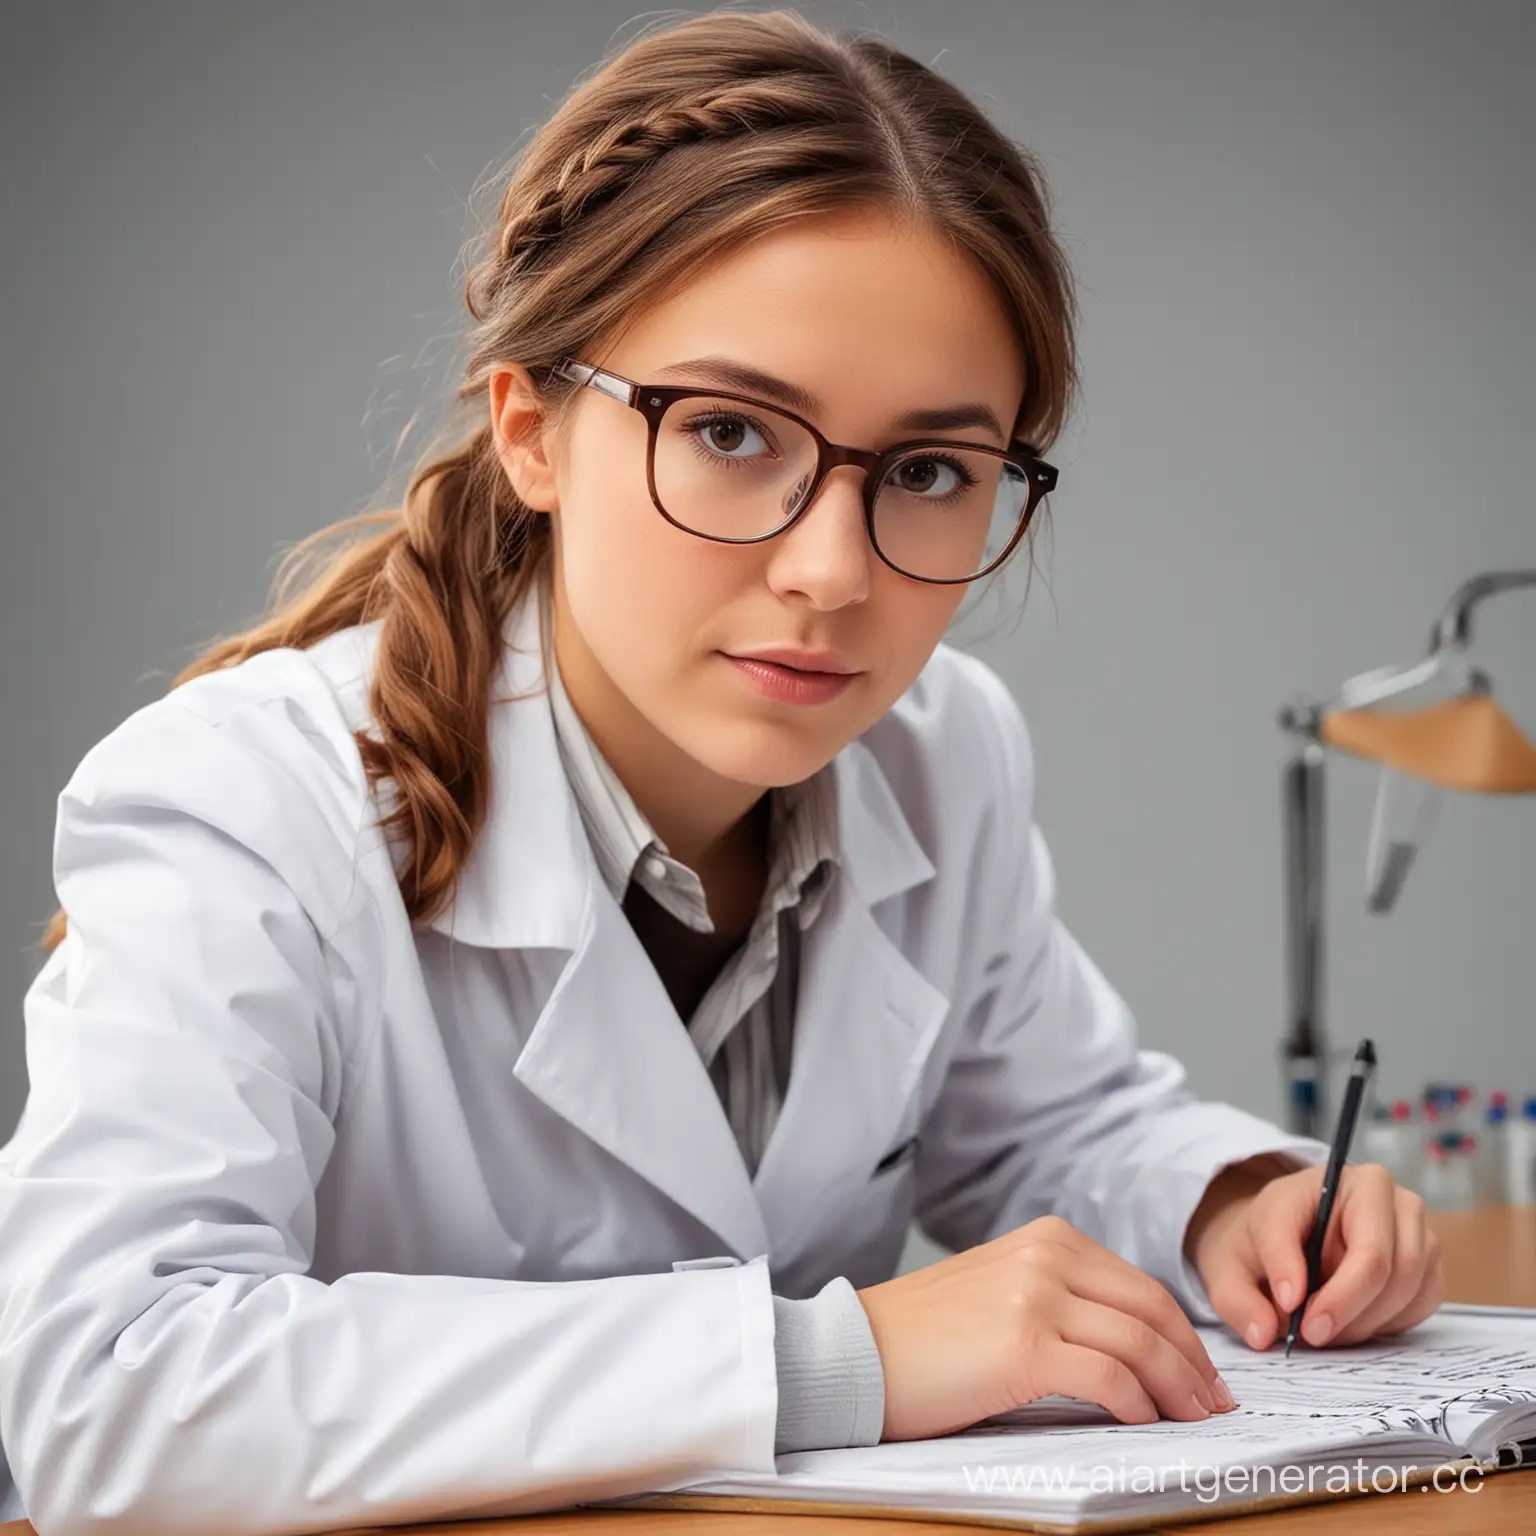 Female-Scientist-with-Brown-Hair-Working-in-Laboratory